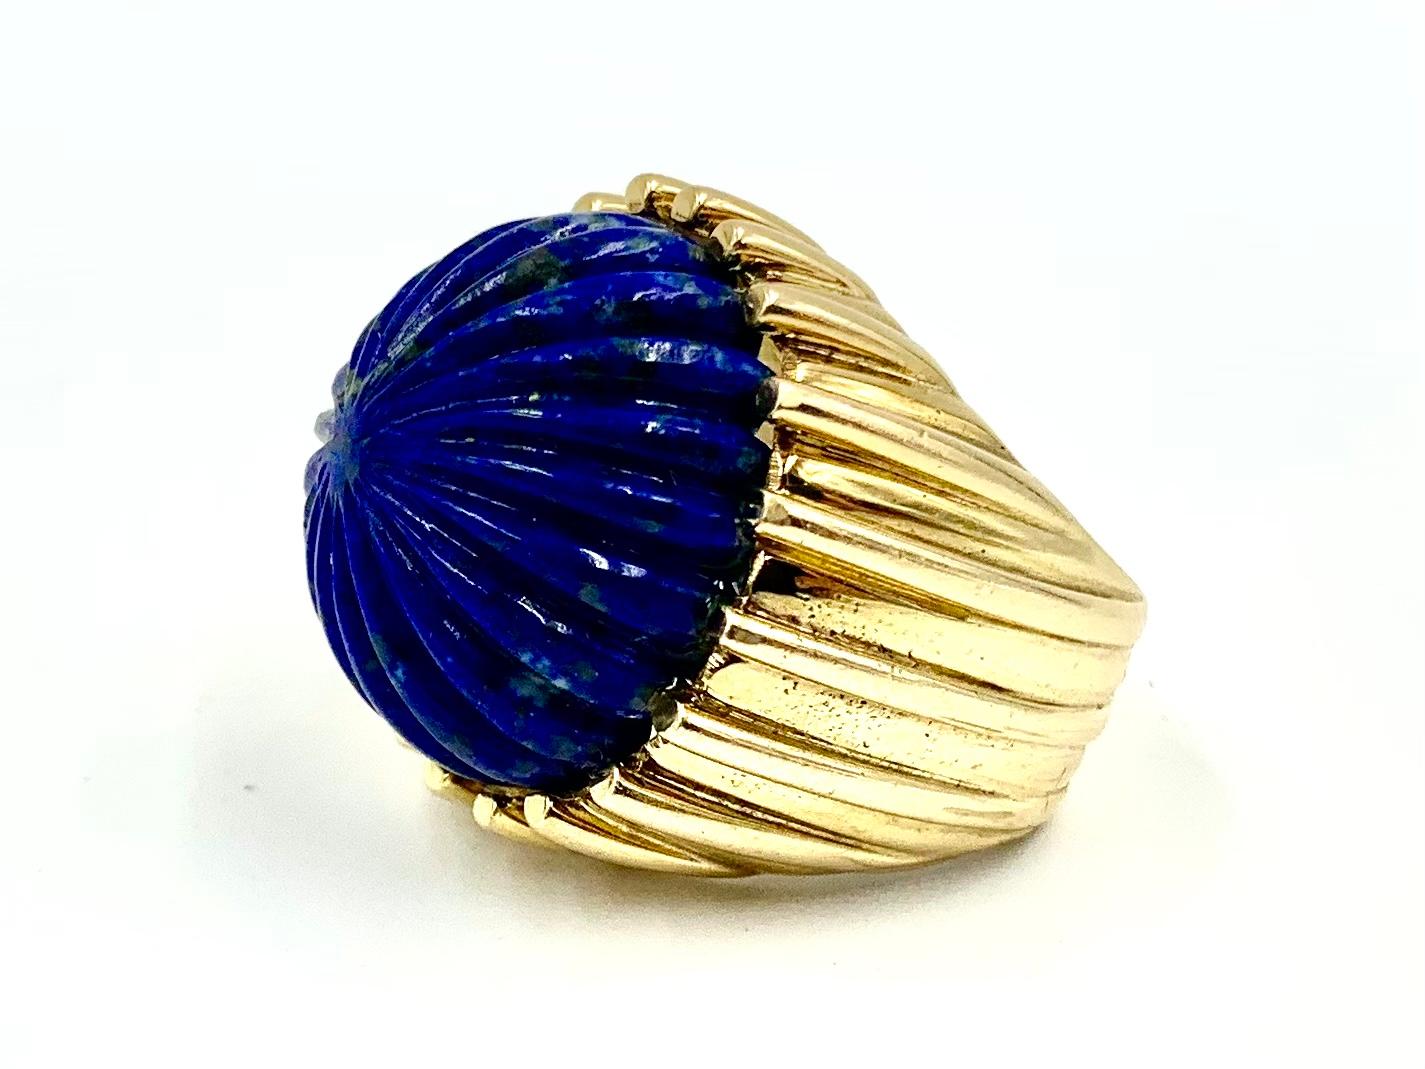 Large Estate Carved Lapis Lazuli Fluted 14K Yellow Gold Cocktail Ring, 1980's For Sale 2